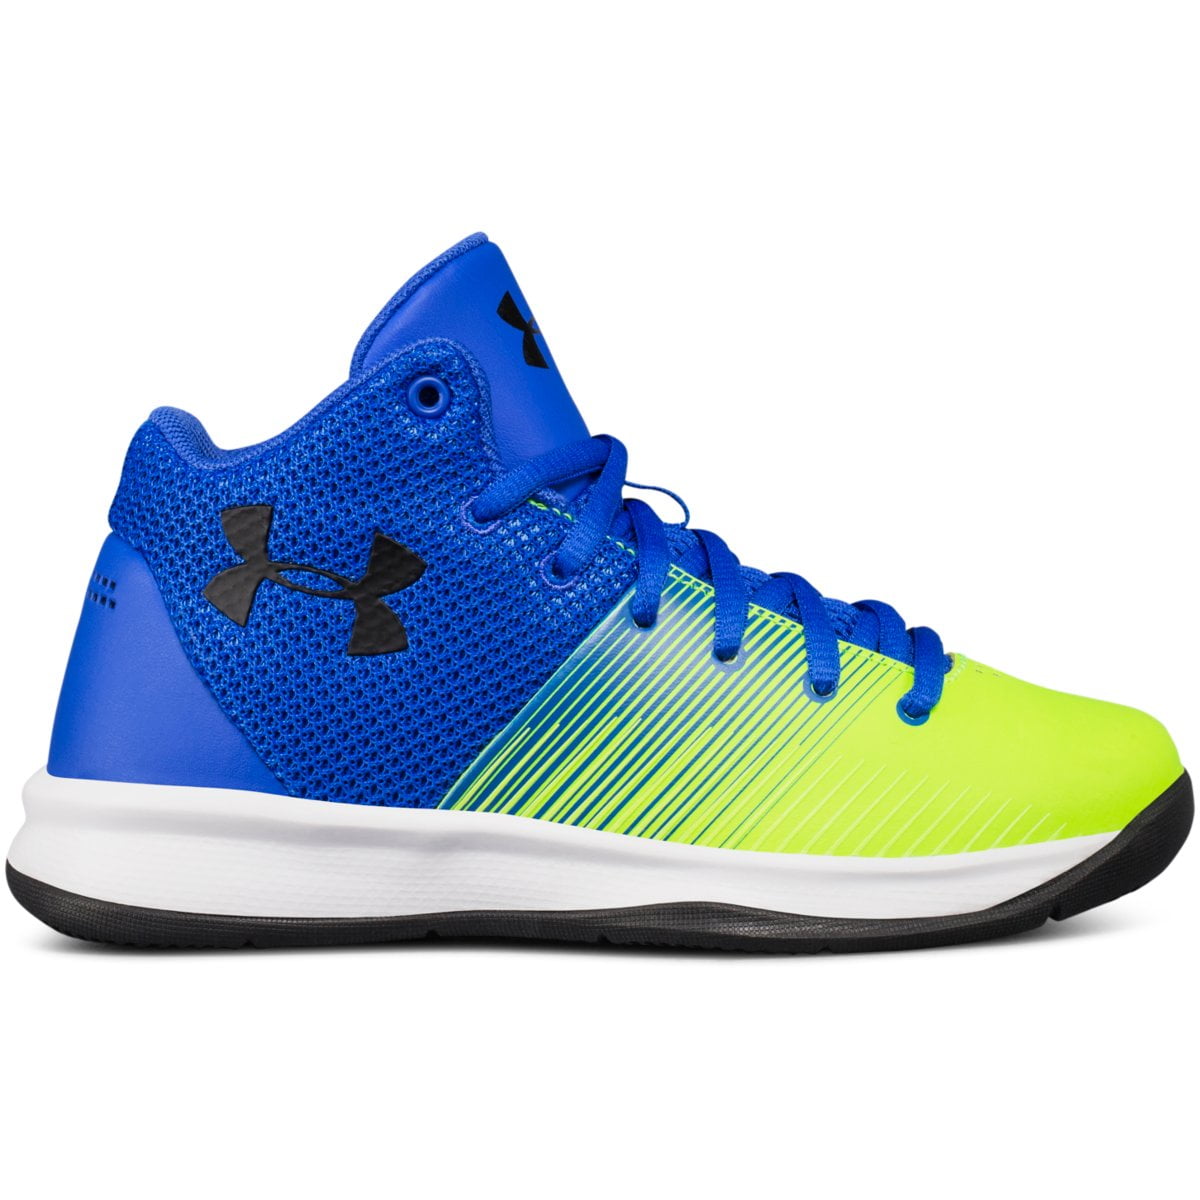 under armour surge basketball shoes